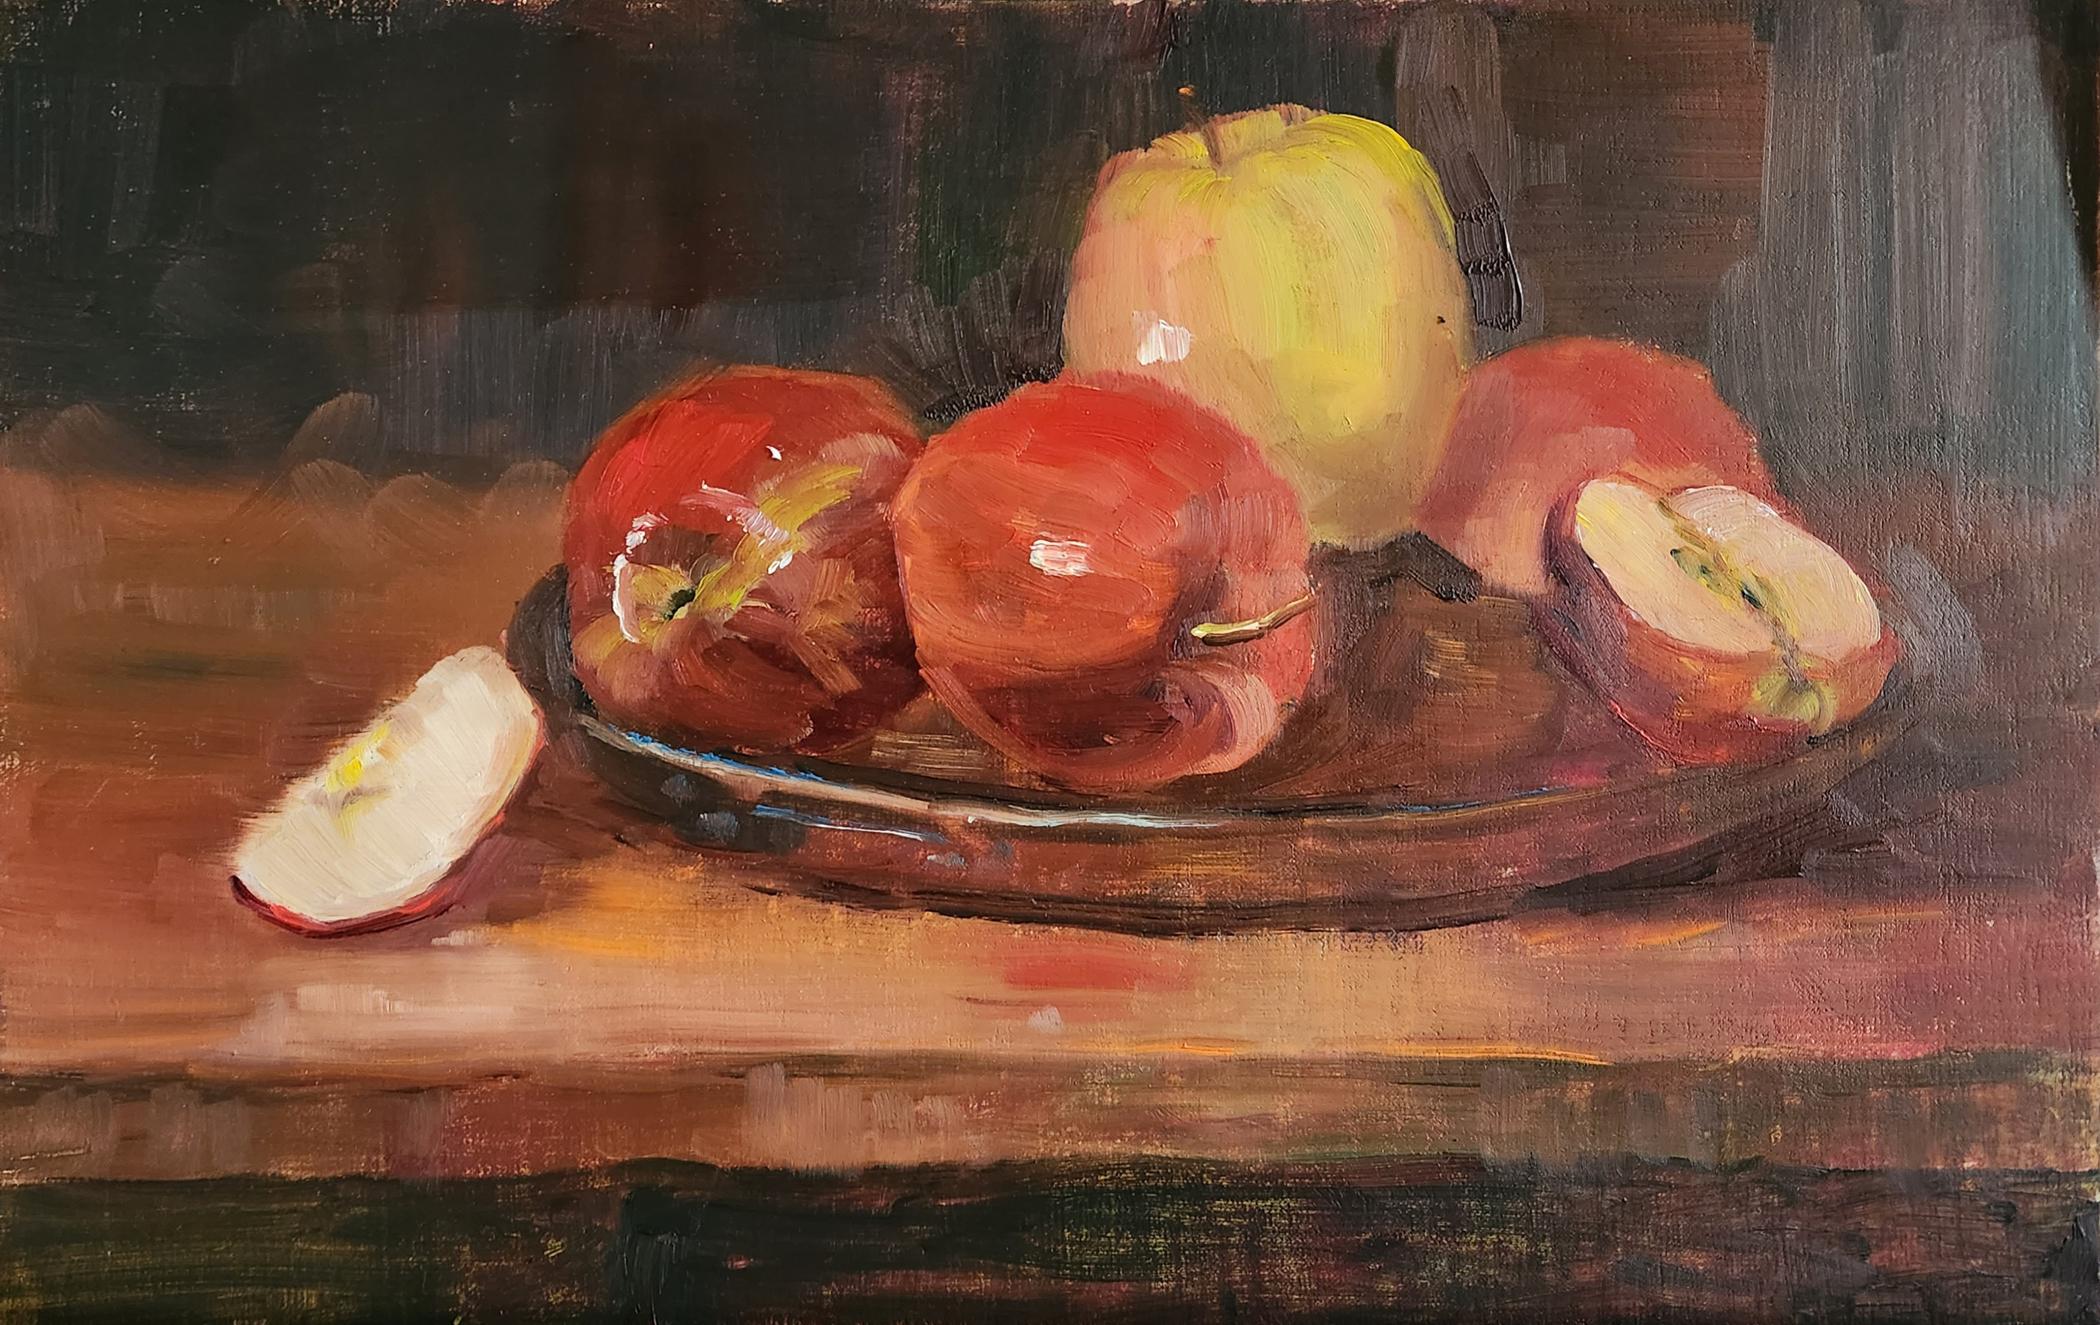 Apples for Pie, 9x15" oil on board - Painting by Lu Haskew